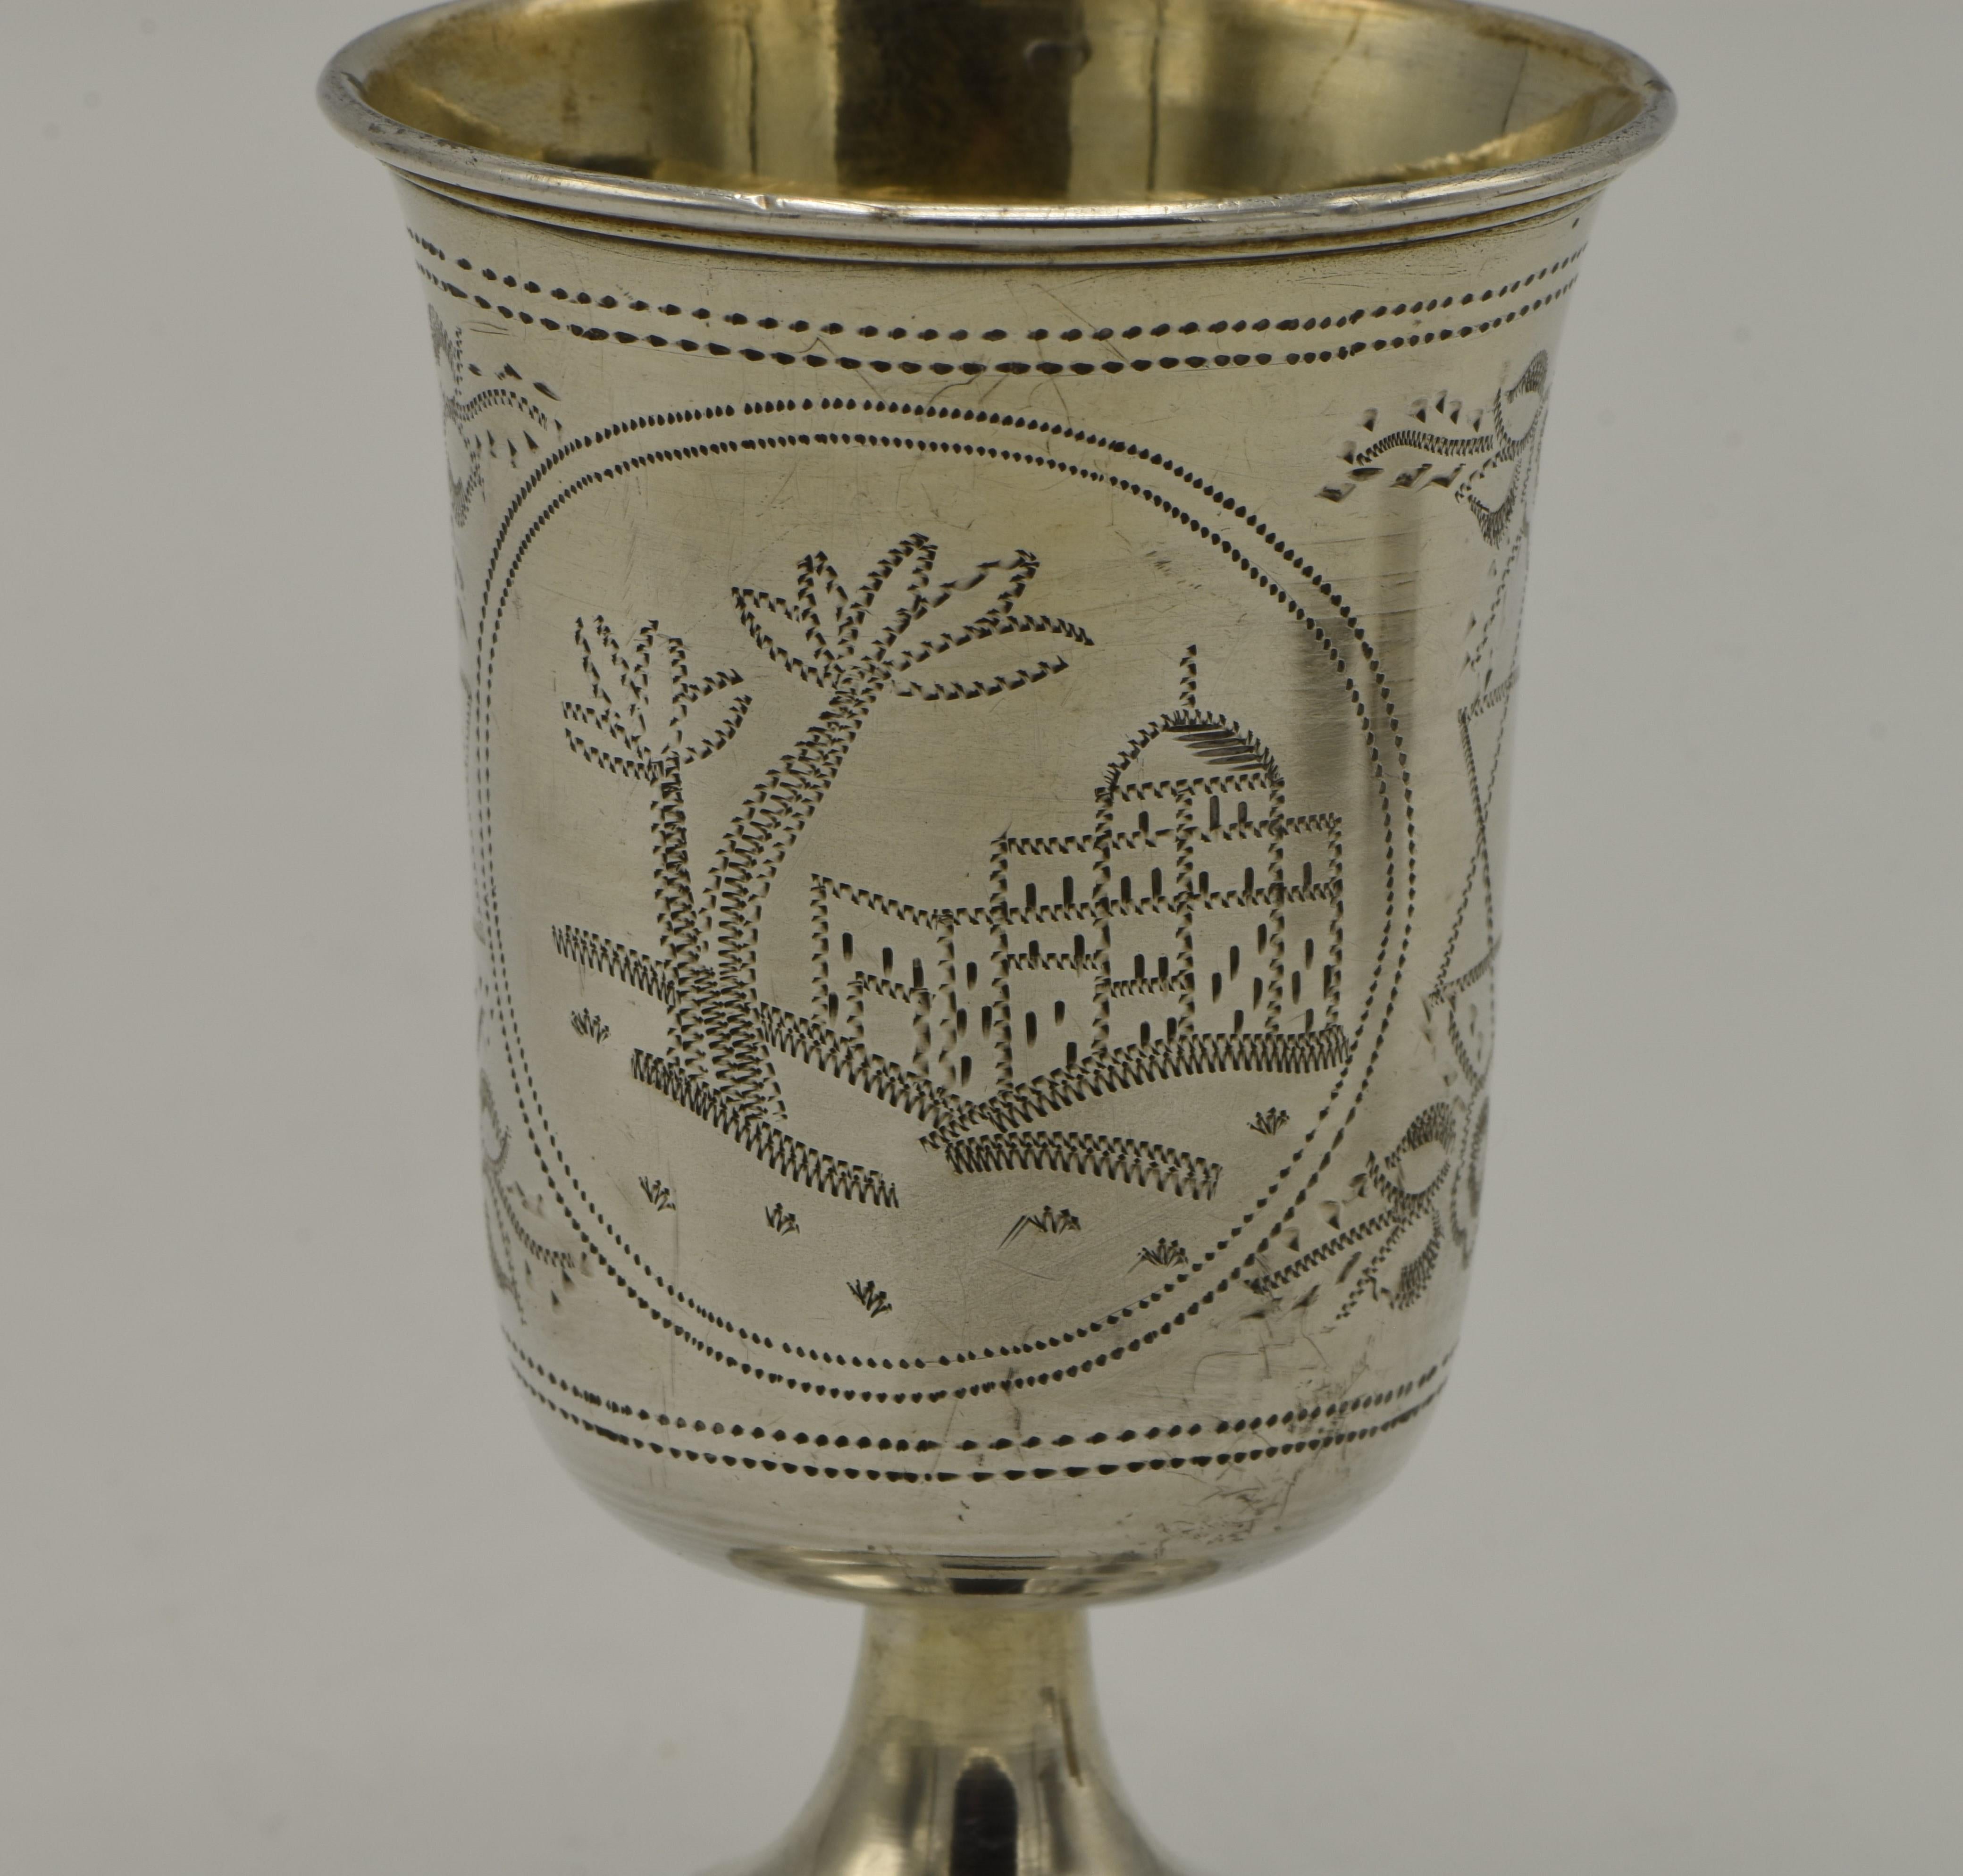 Silver Kiddush goblet with saucer, Austria, circa 1880. 
The goblet is engraved with two scenes, one with the Western Wall in Jerusalem and the other scene with the view of the Dome of the Rock. The saucer is hand decorated with an engraved